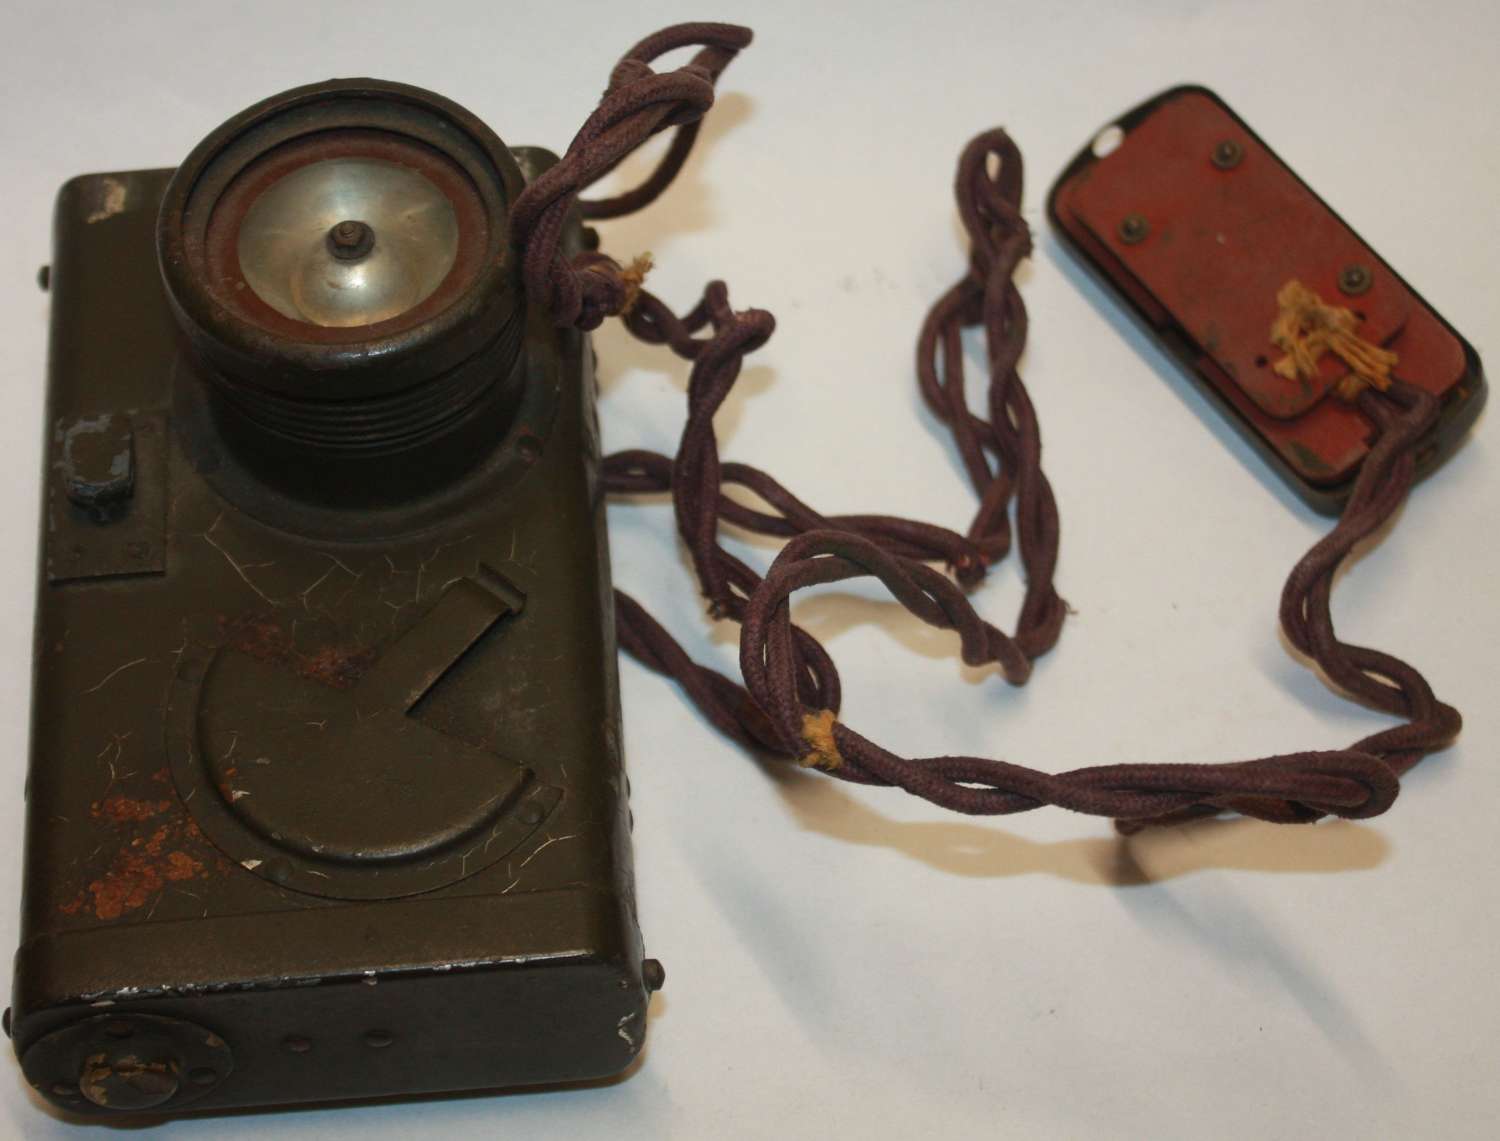 A GOOD EXAMPLE OF THE WWI MKIII TRENCH SIGNALLING LAMP